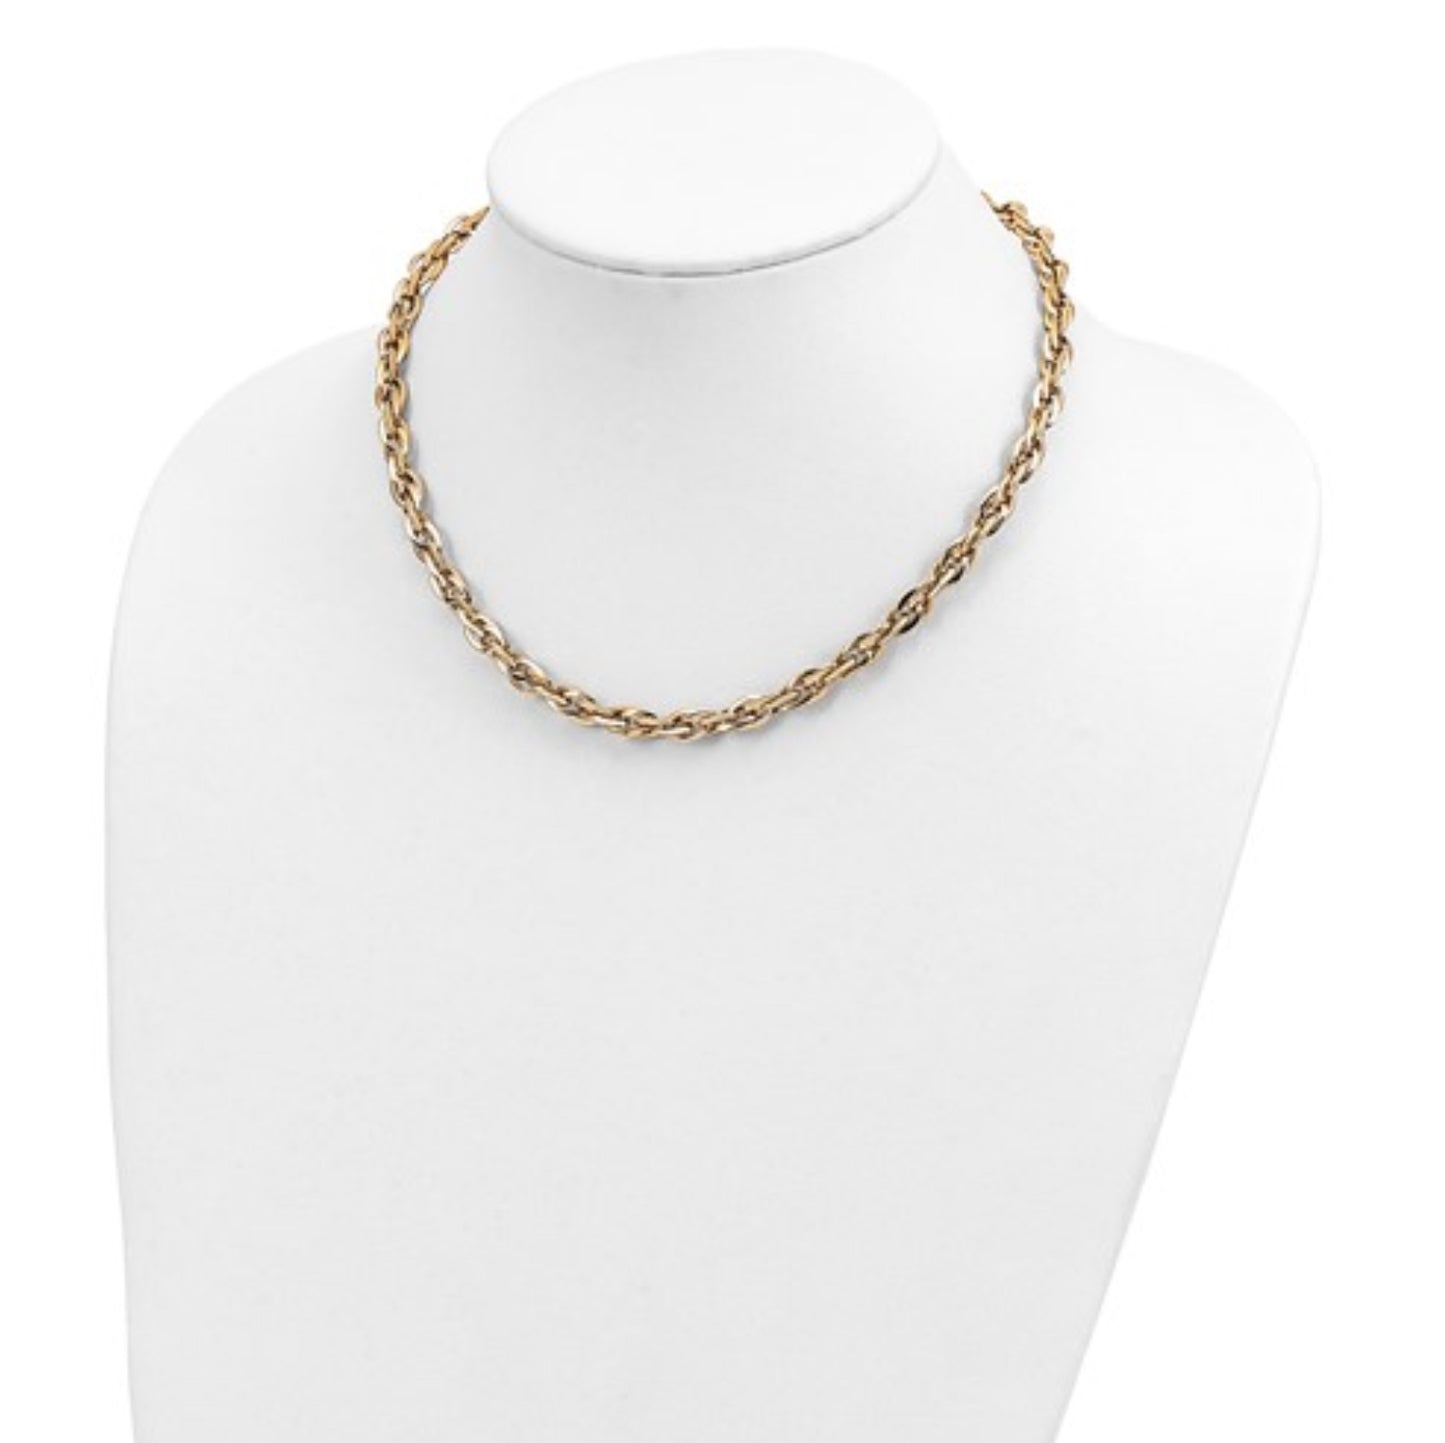 14k Yellow Gold Riley Necklace